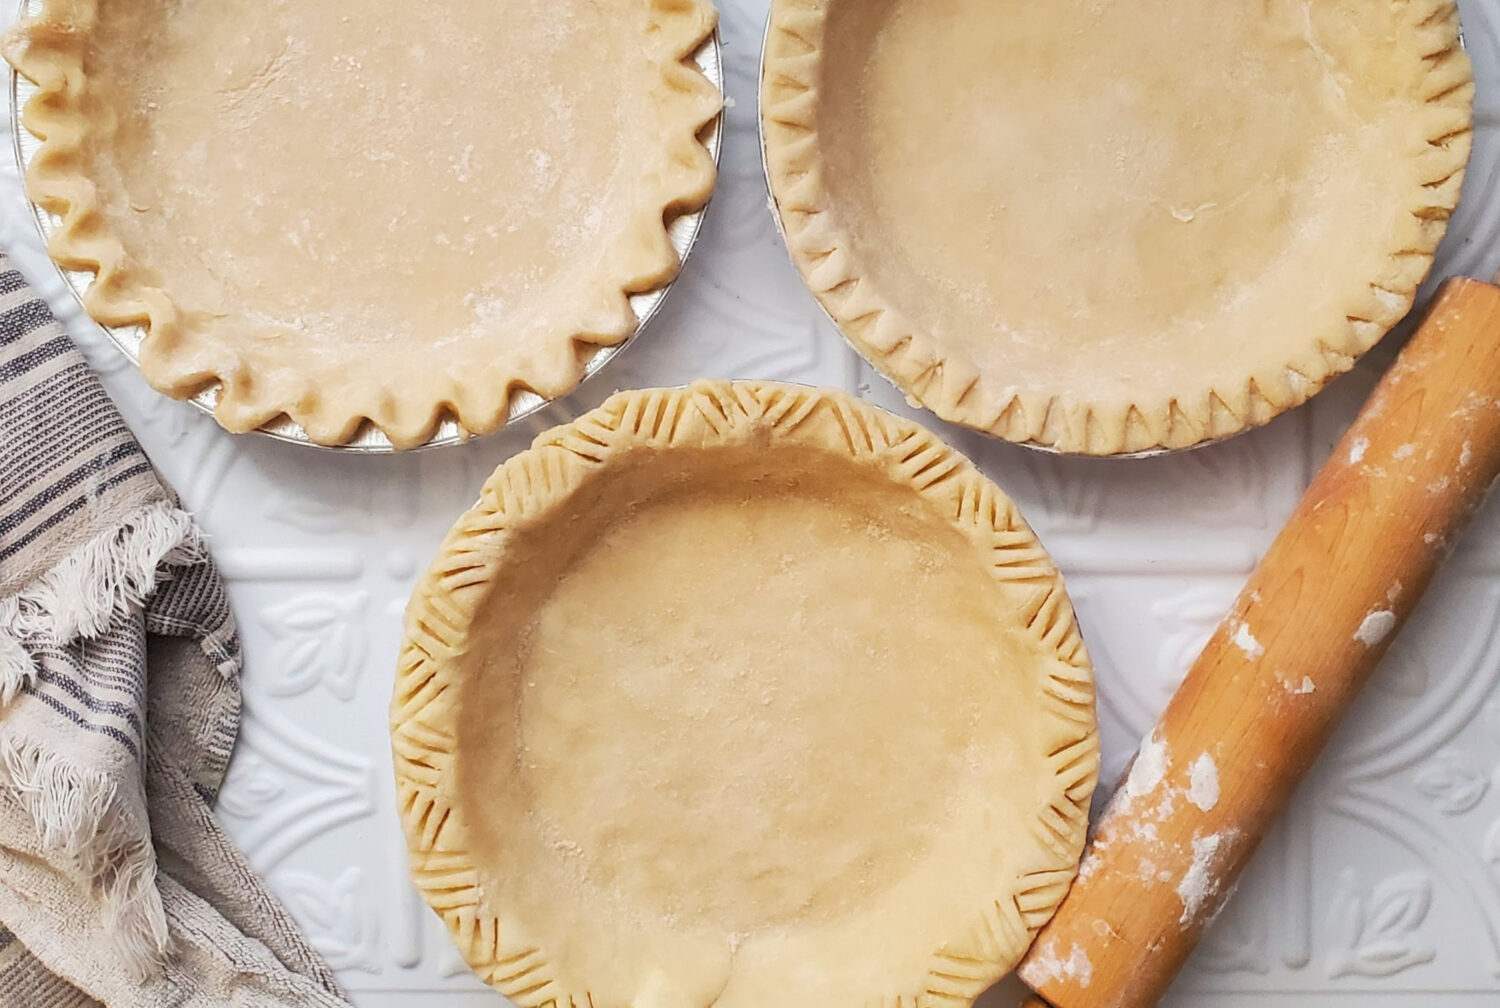 English Wig Pie Pastry is a butter crust, with egg & vinegar, which bakes into a golden flakey tender crust. Perfect for savory or sweet pie.